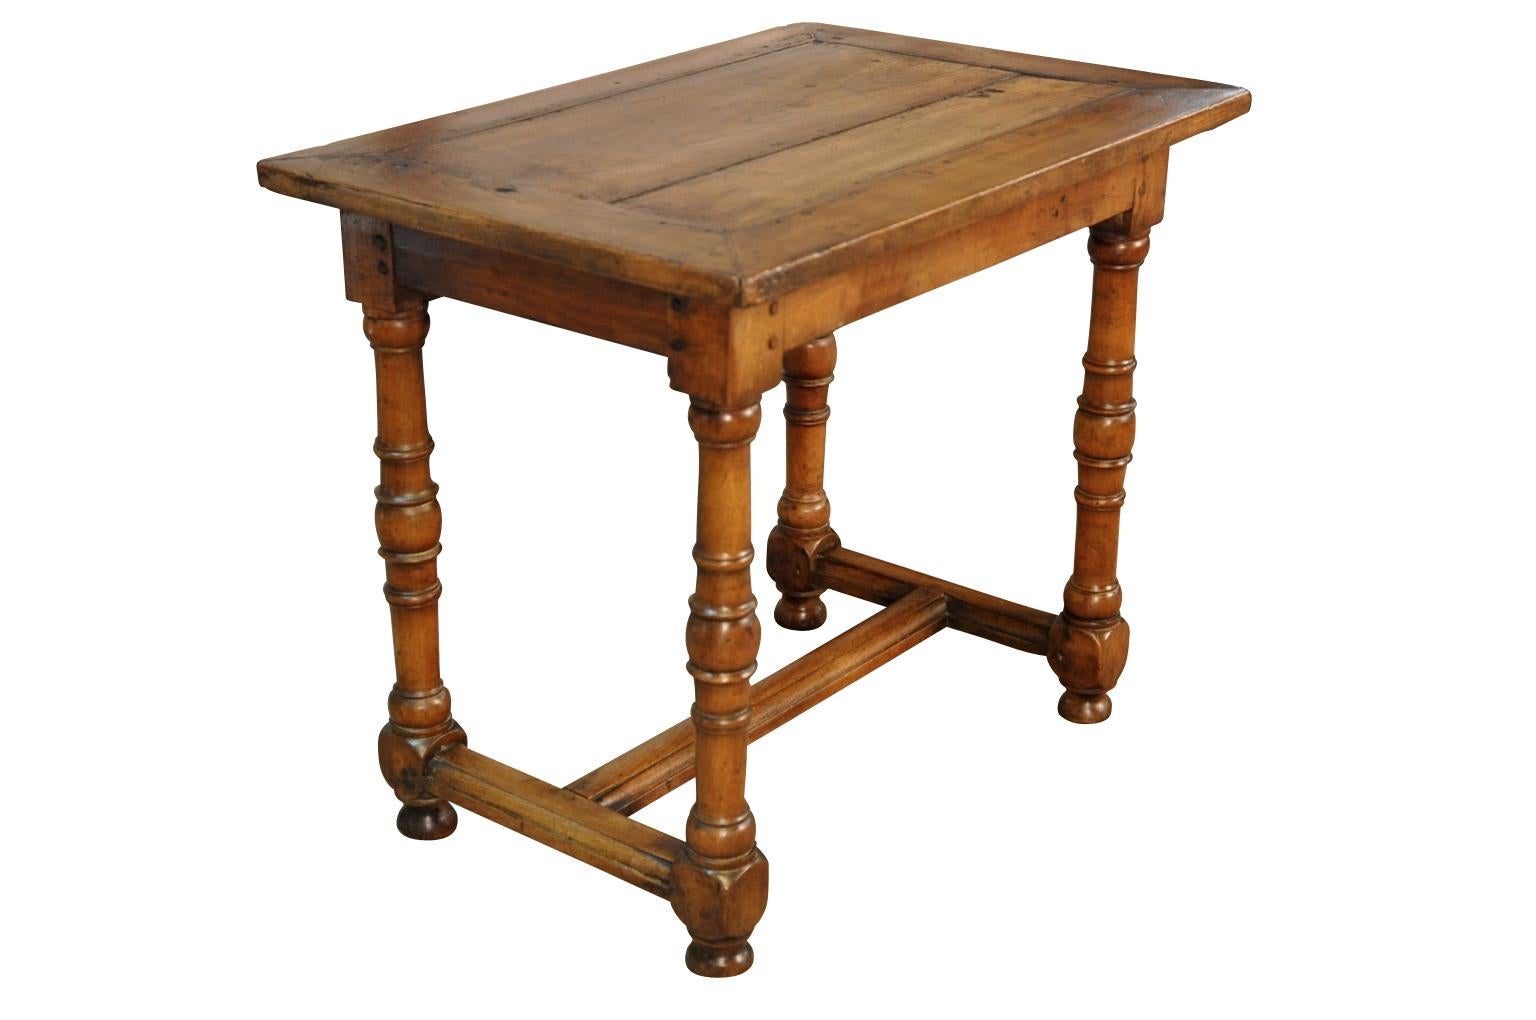 A very handsome 18th century Louis XIII style side table from the Provence region of France. Beautifully constructed from rich walnut with nicely turned legs. Great patina.